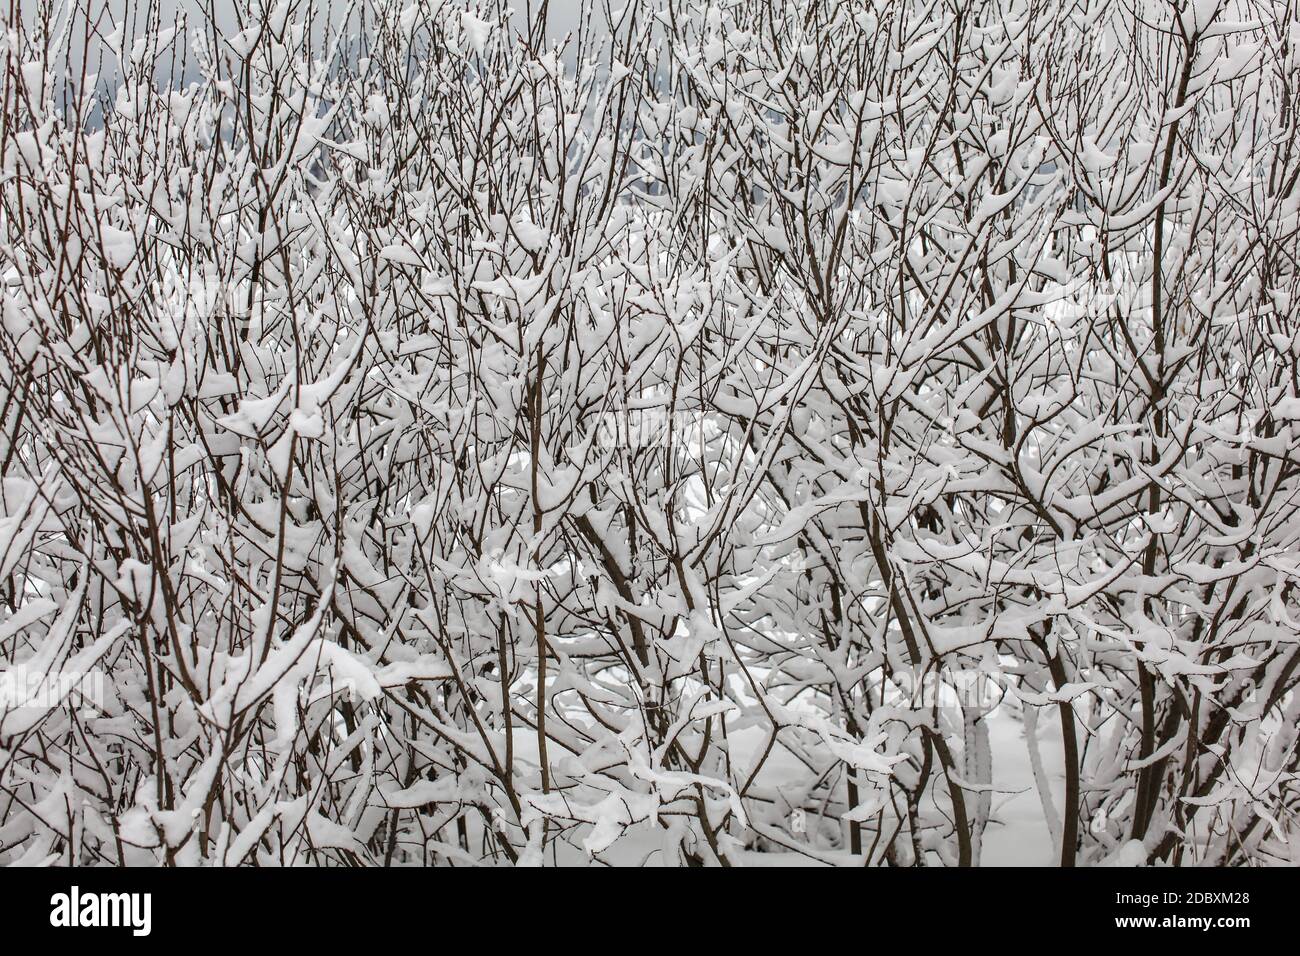 Thin dense tree branches covered with snow on overcast day. Stock Photo